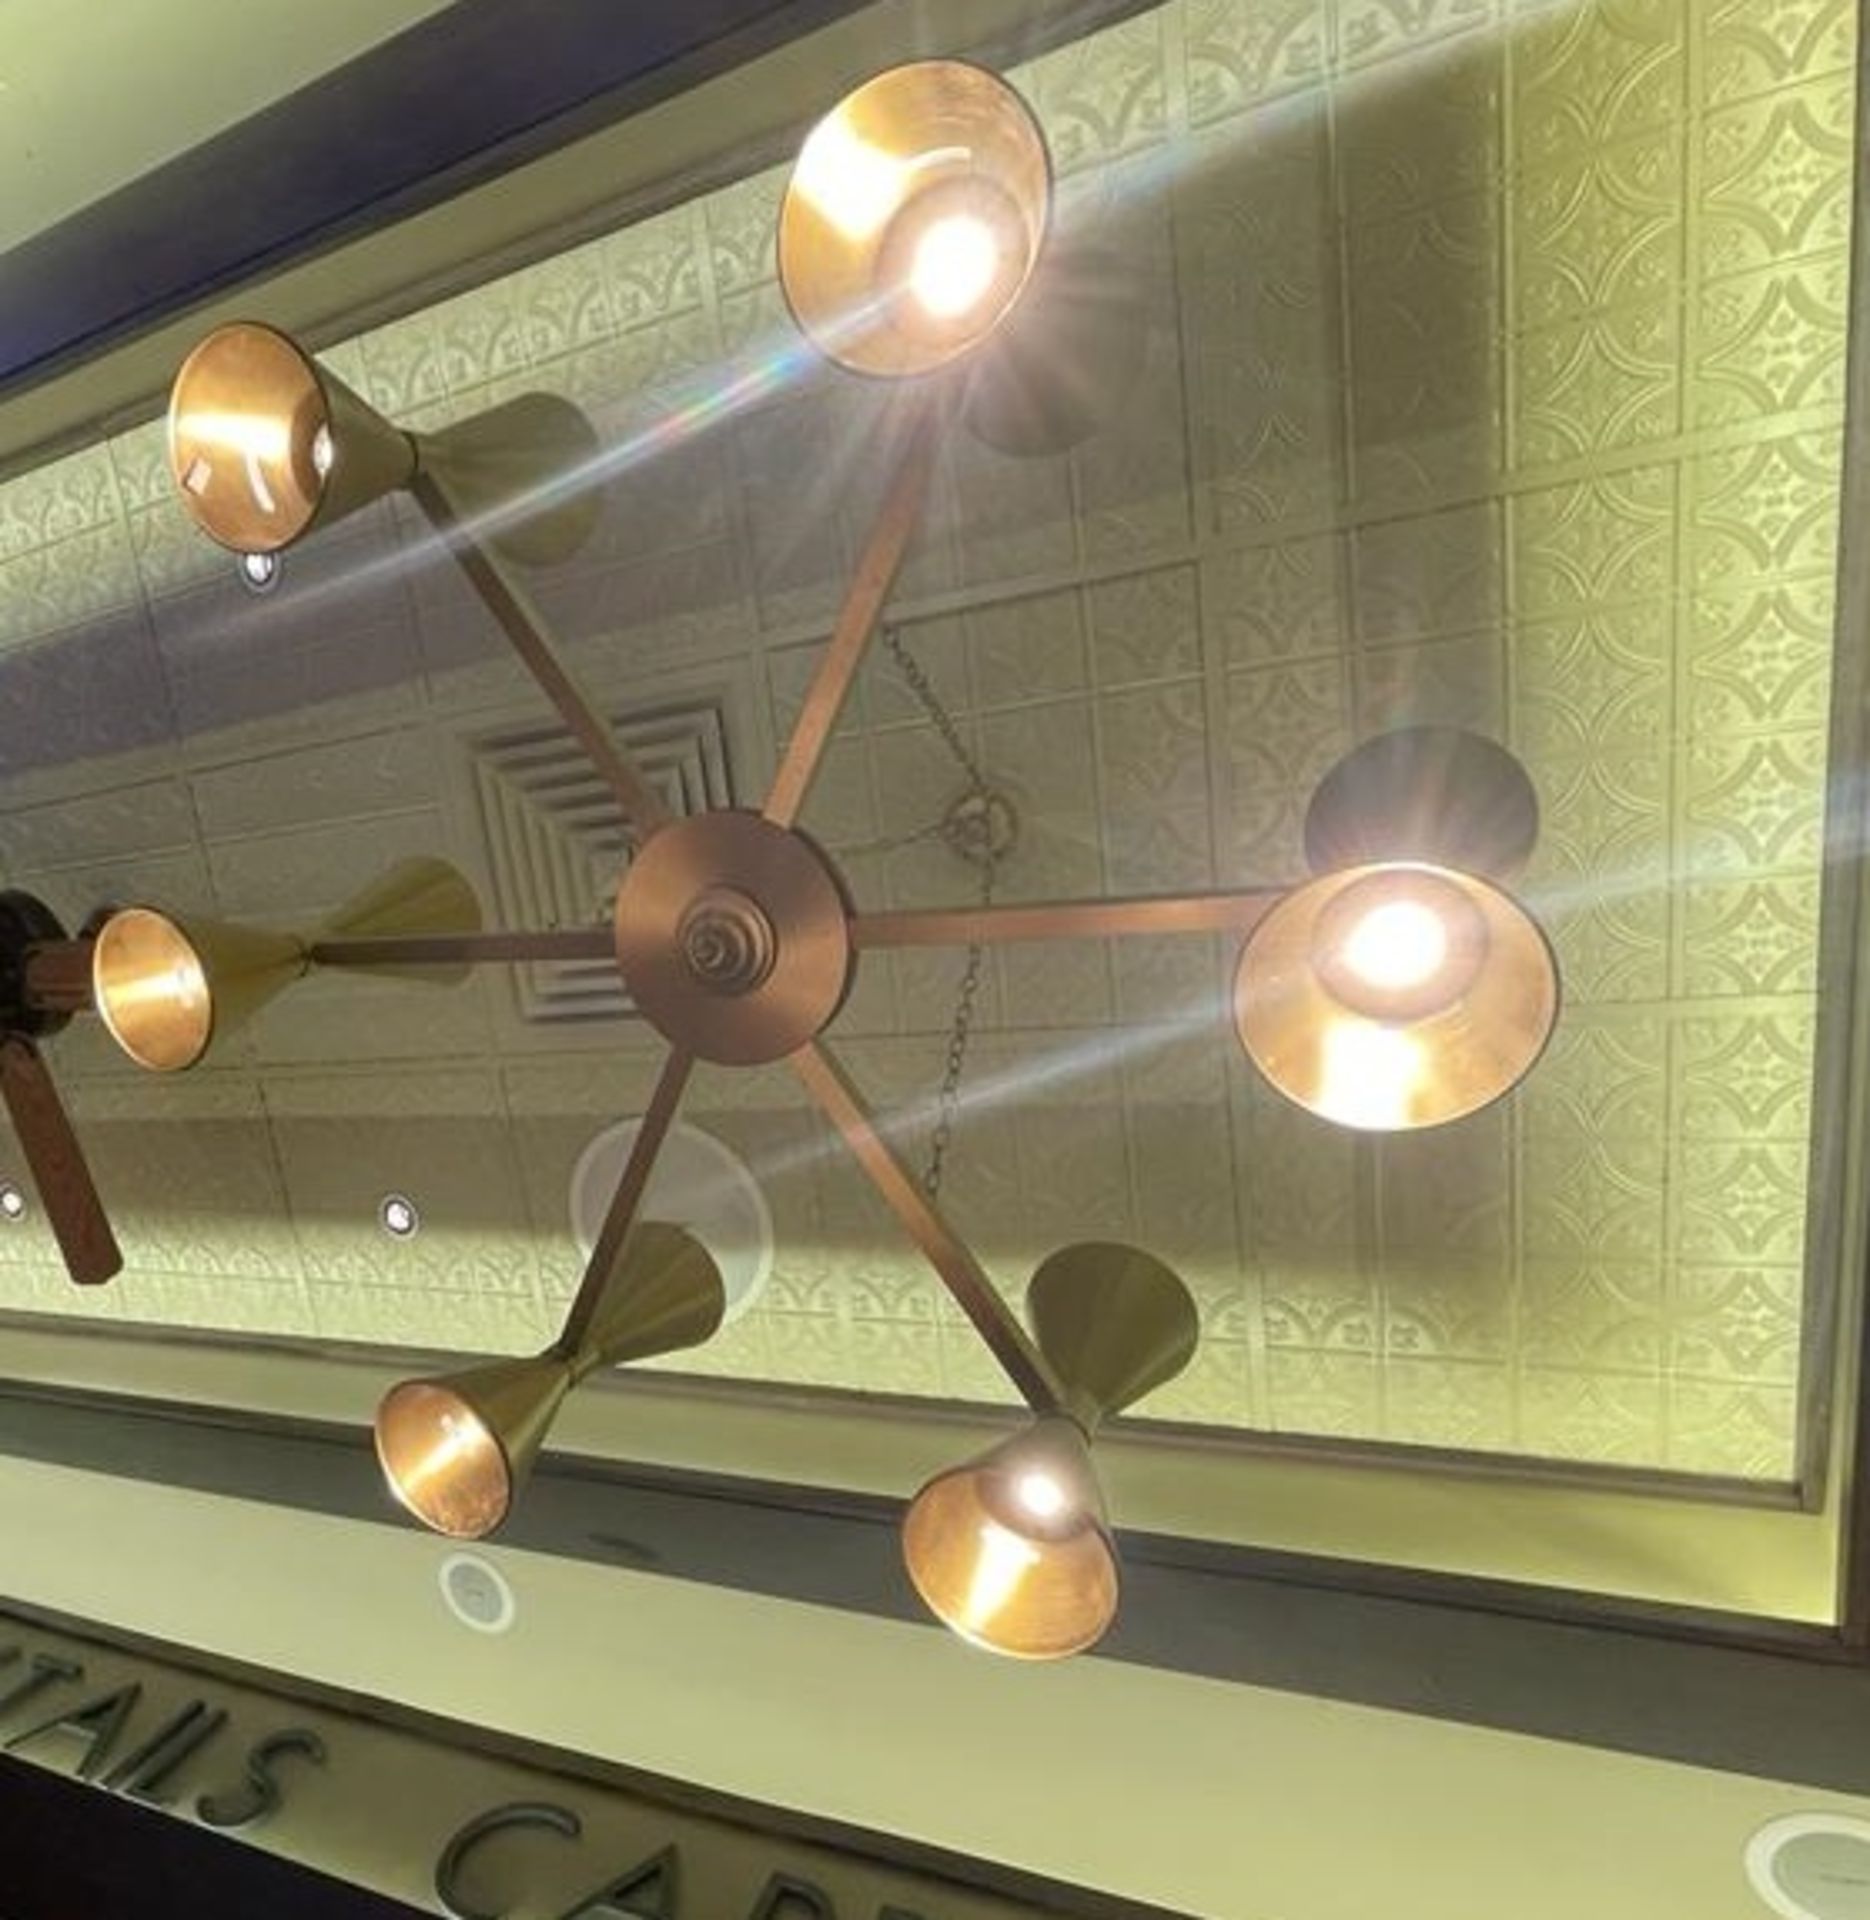 1 x Commercial 6-Arm Ø1-Metre Chandelier Ceiling Light - From a Popular American Diner - CL809 - - Image 2 of 2